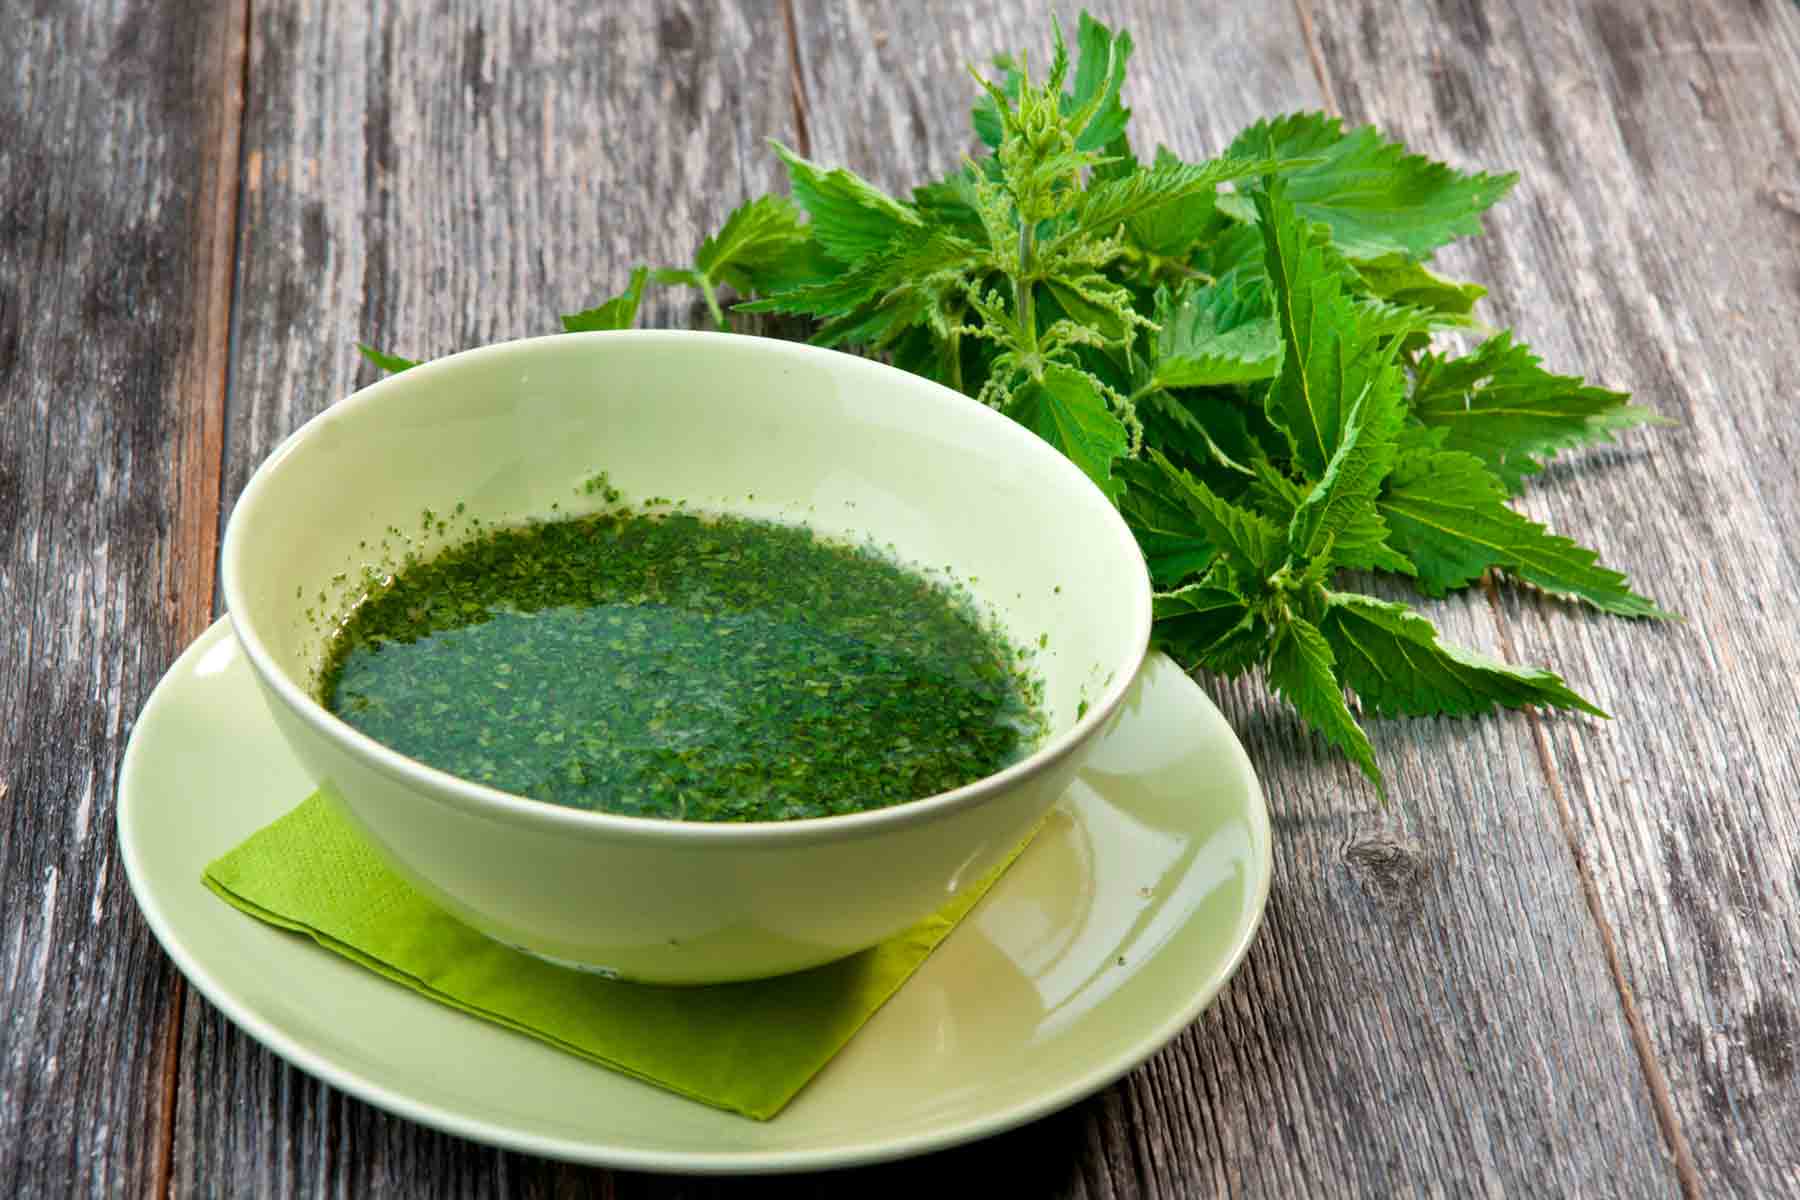 Celebrating May With A Green Spring Tonic: Rejuvenating Nettle Soup Recipe